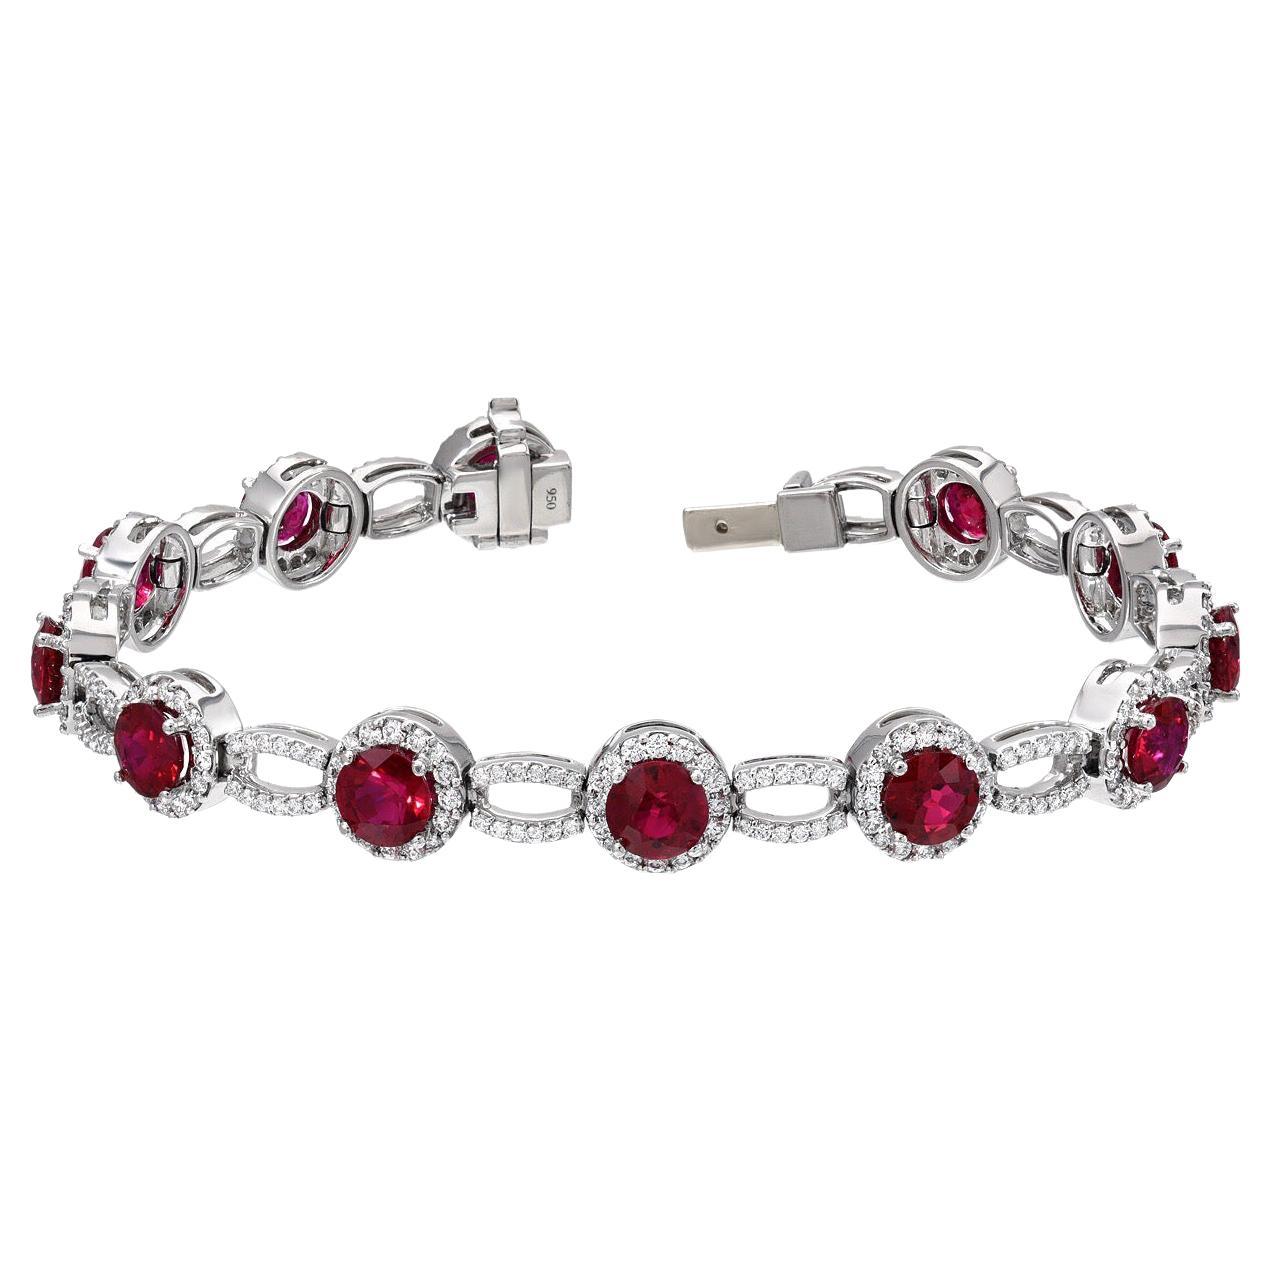 Sensational 9.18 carats total Burmese Ruby rounds, and 1.90 carats total of round brilliant diamonds are hand set in this important platinum diamond bracelet.
6.75 inches long.
This Burma Ruby bracelet set is superior in color, clarity and